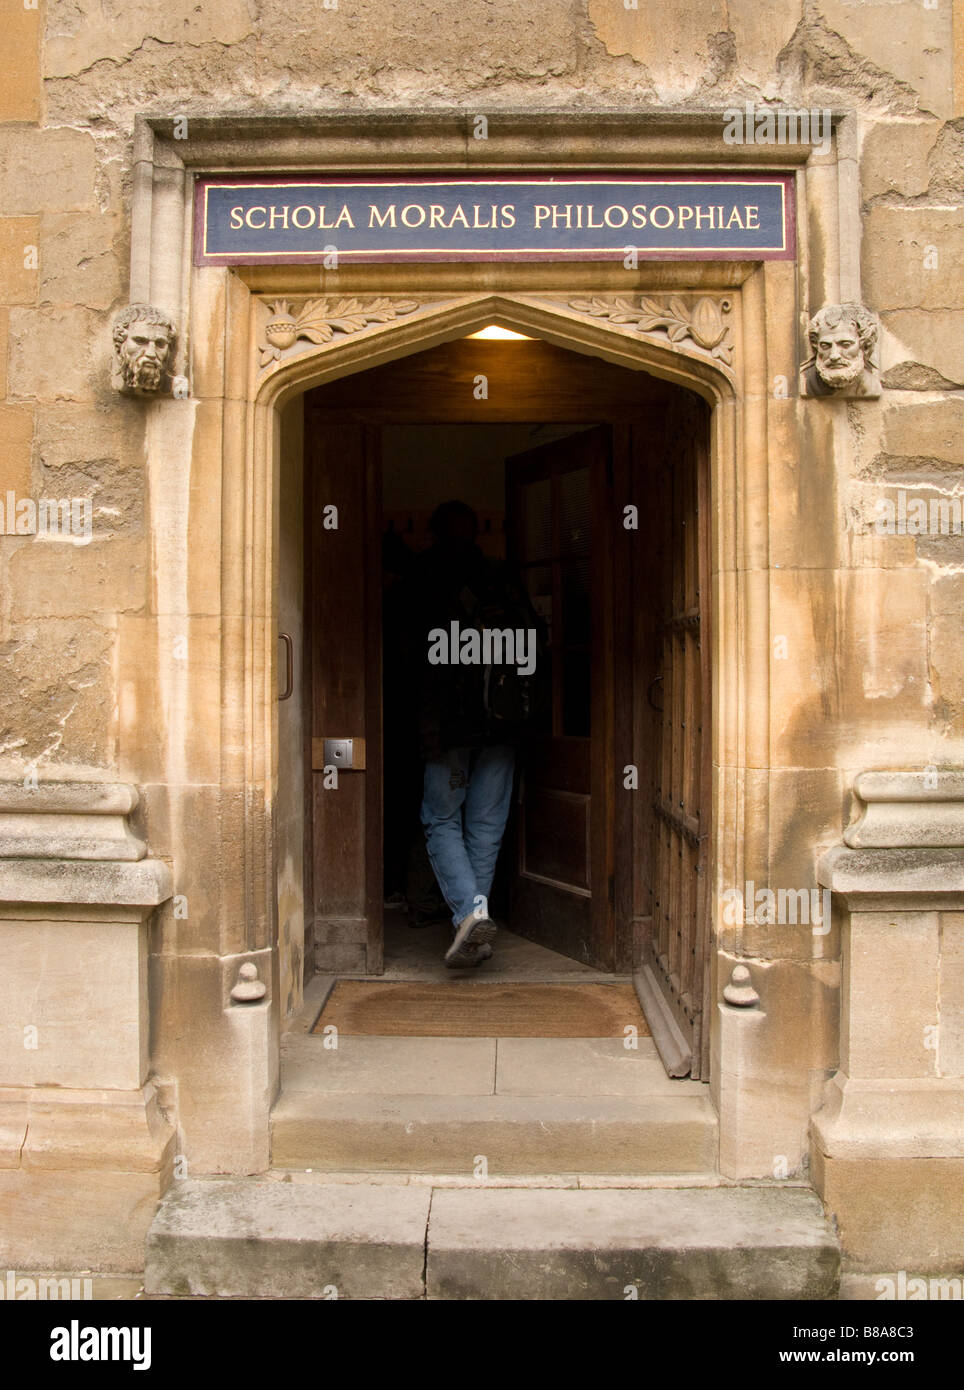 Person walking through door to the School of Moral Philosophy (or Schola Moralis Philosophiae), Bodleian Library, Oxford, UK Stock Photo